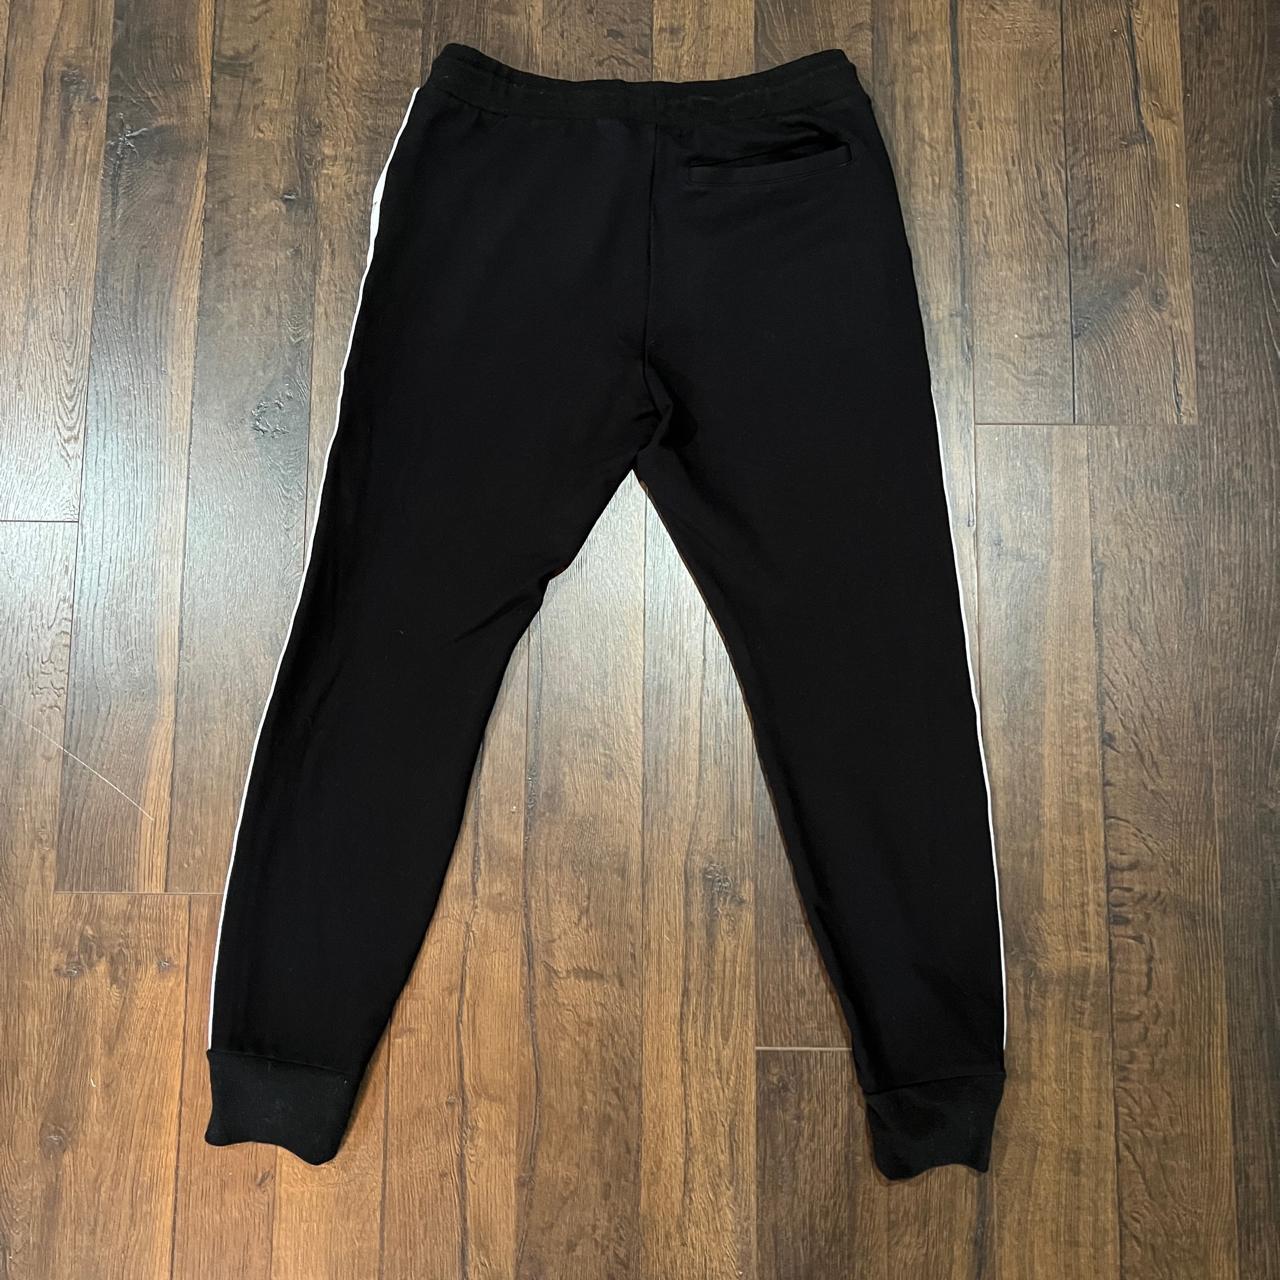 Guess Men's Black and White Joggers-tracksuits | Depop